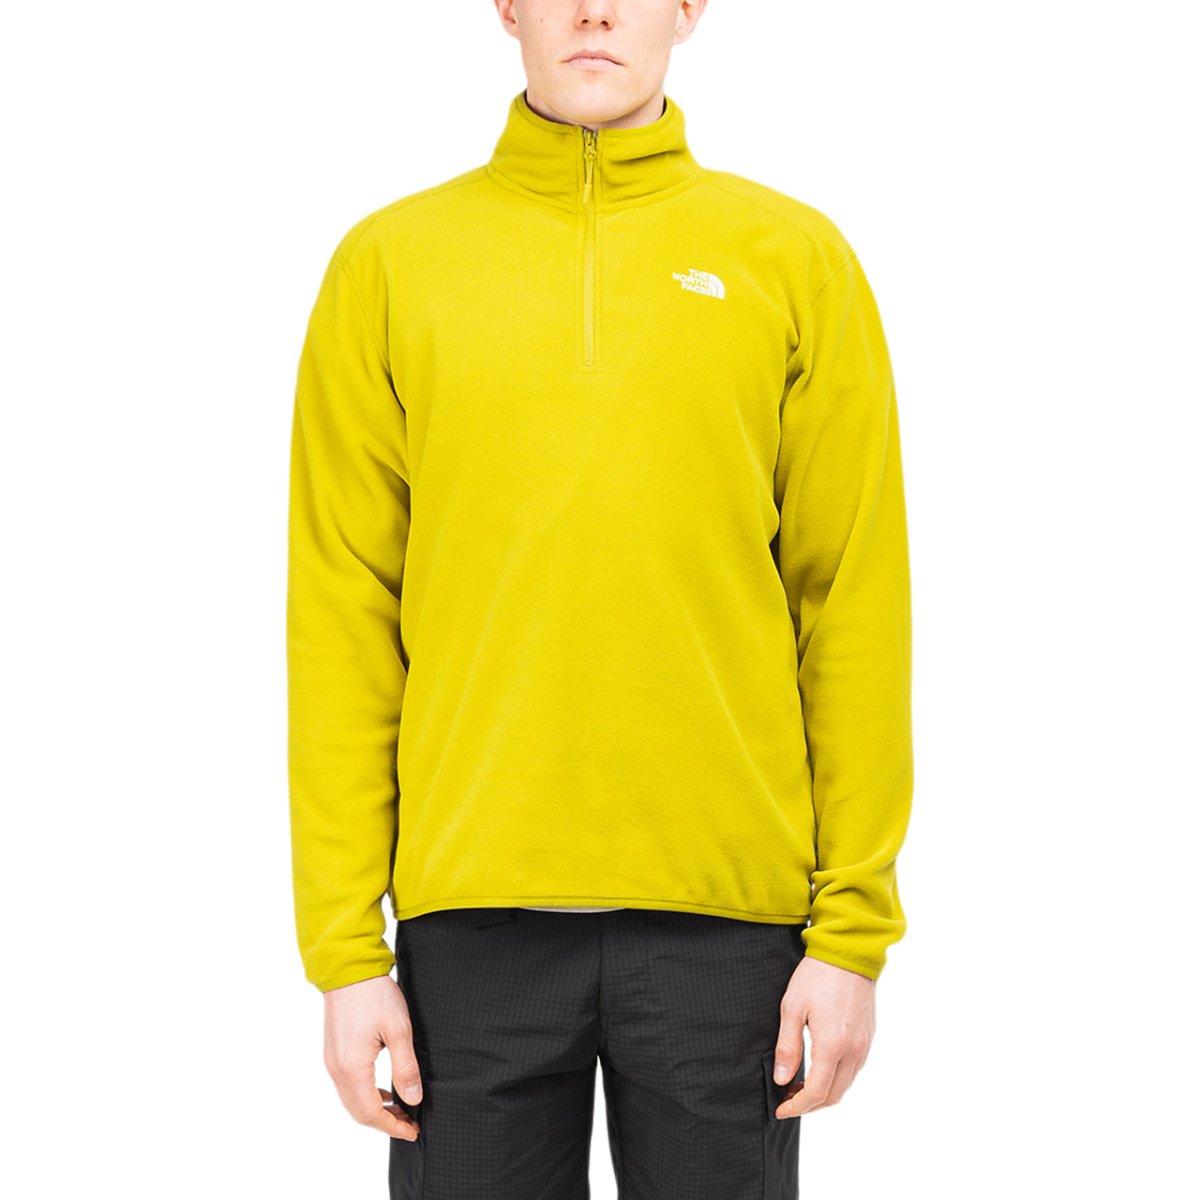 Image of The North Face 100 Glacier Fleece Pullover (Yellow)